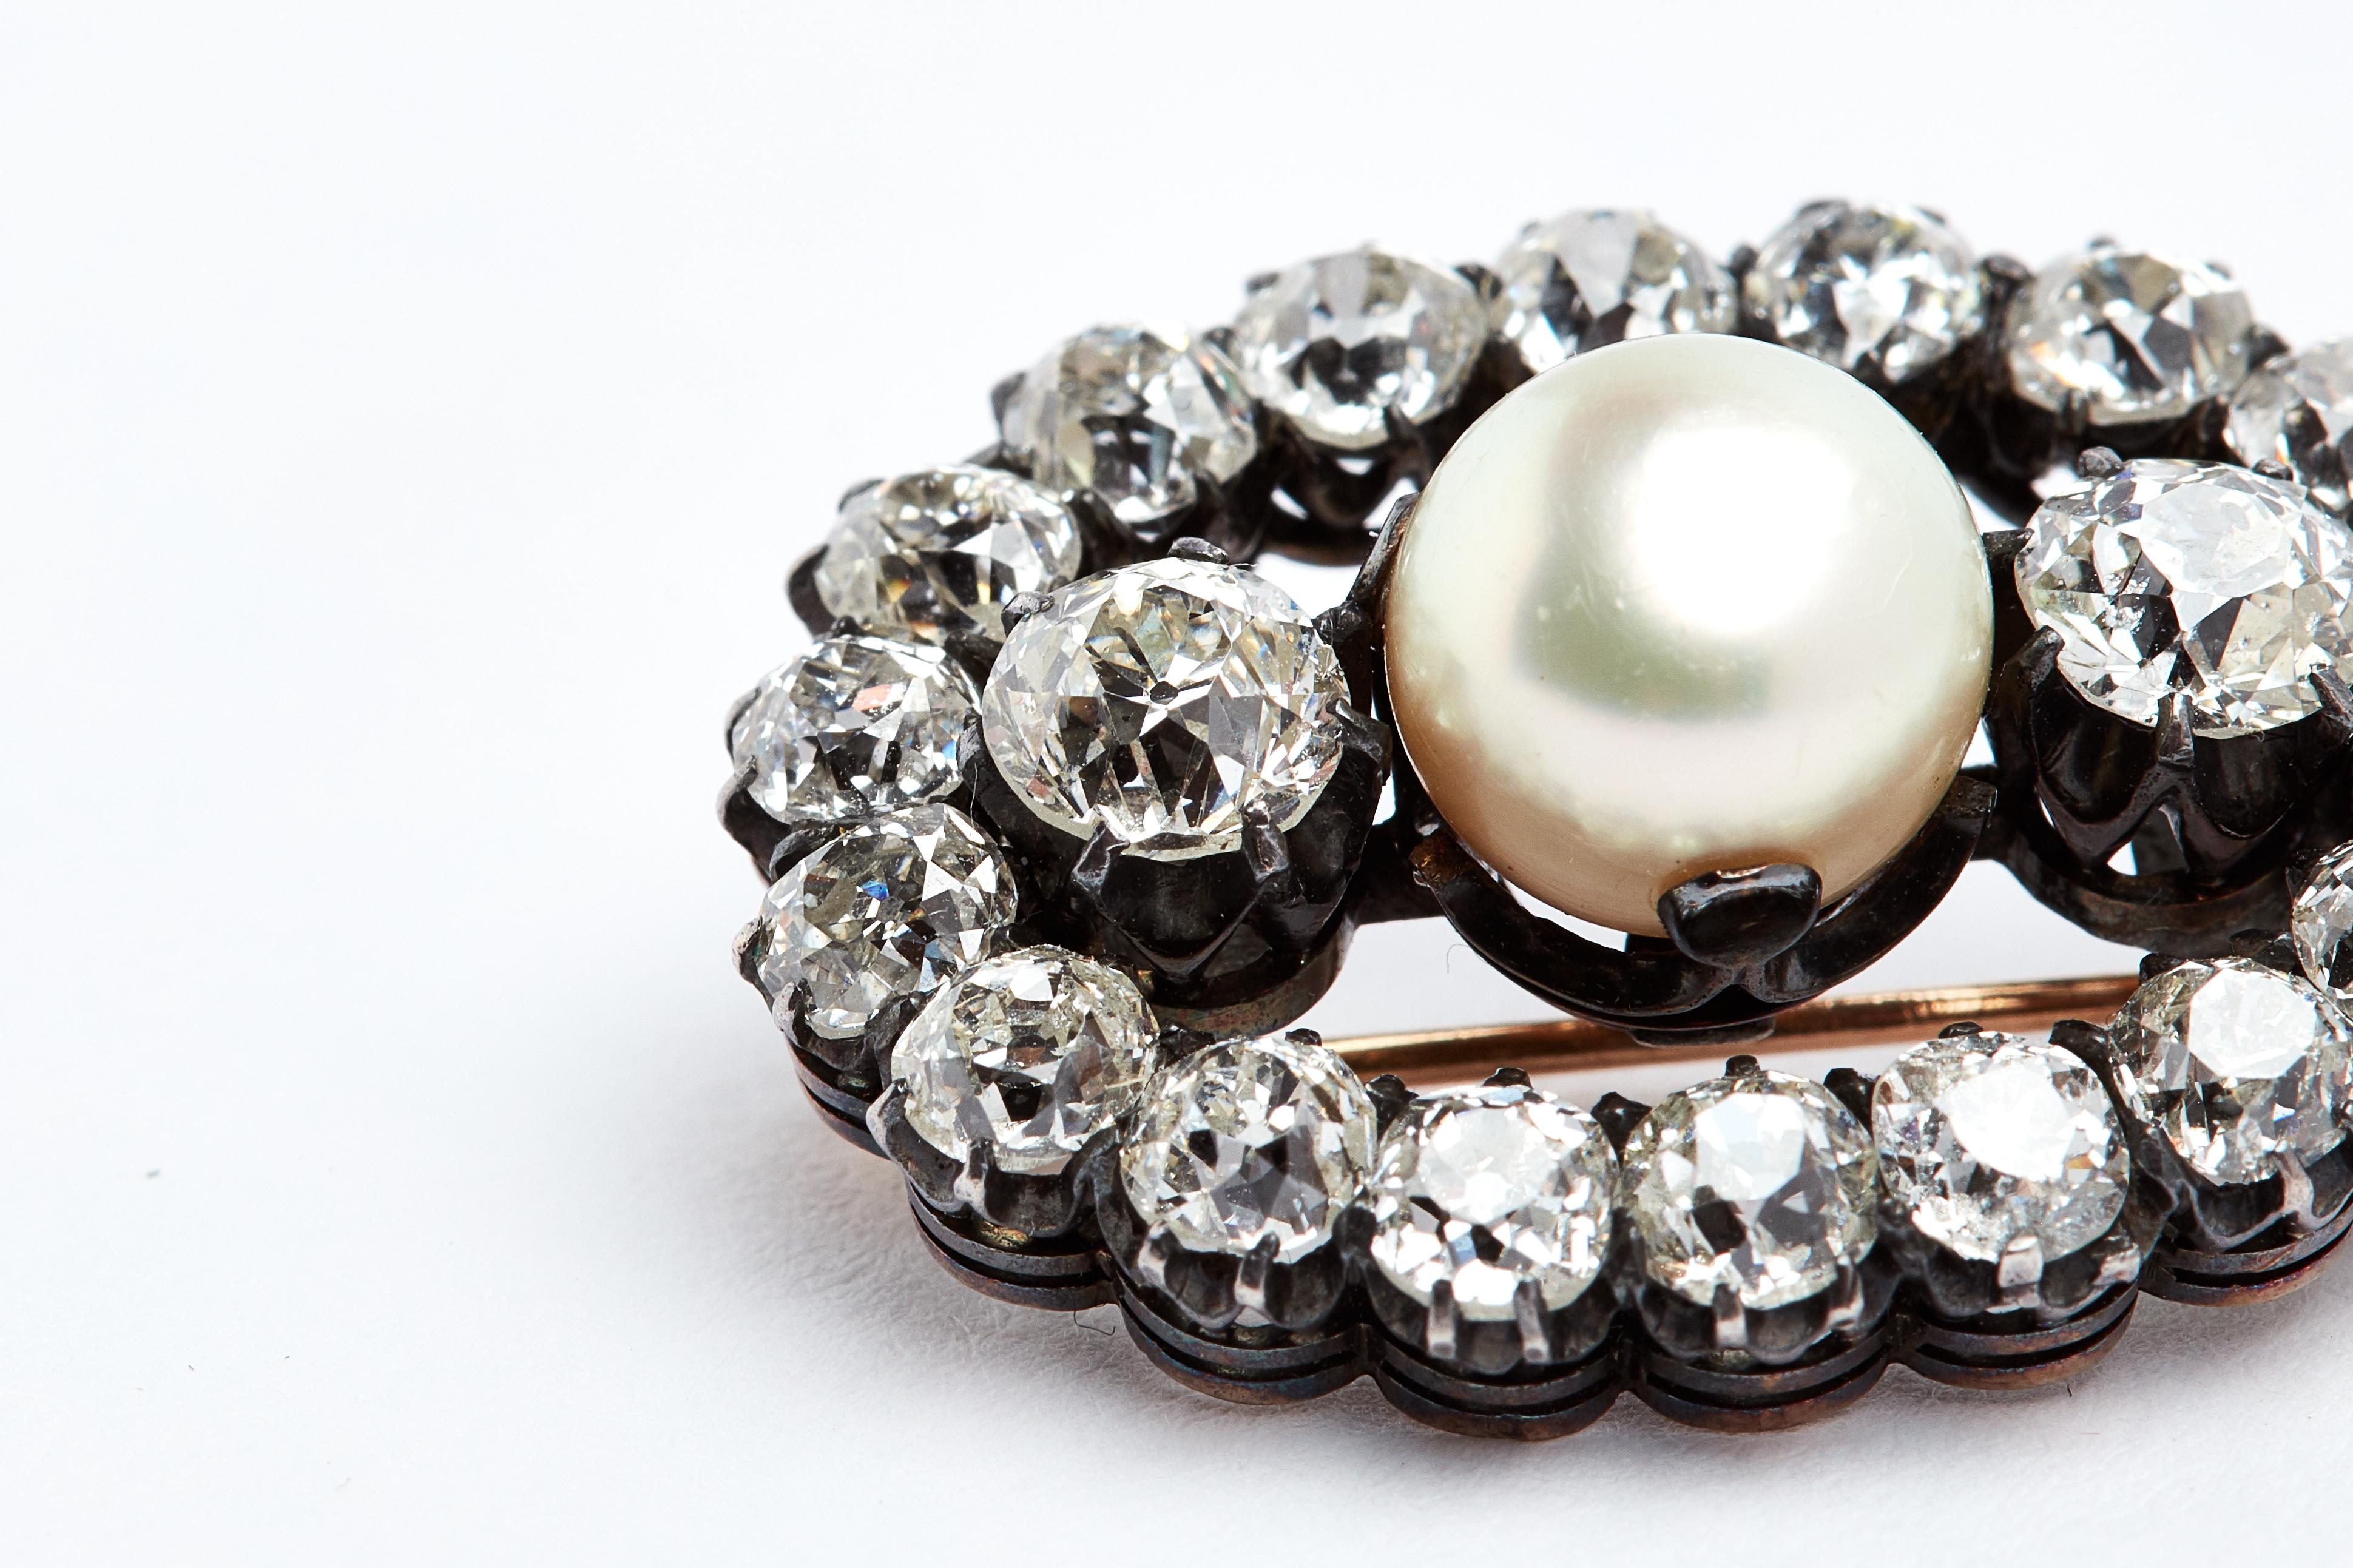 18k Antique Oval Diamond and Pearl Brooch. 22 old european cut white round diamonds. aprox 6 carats total. 